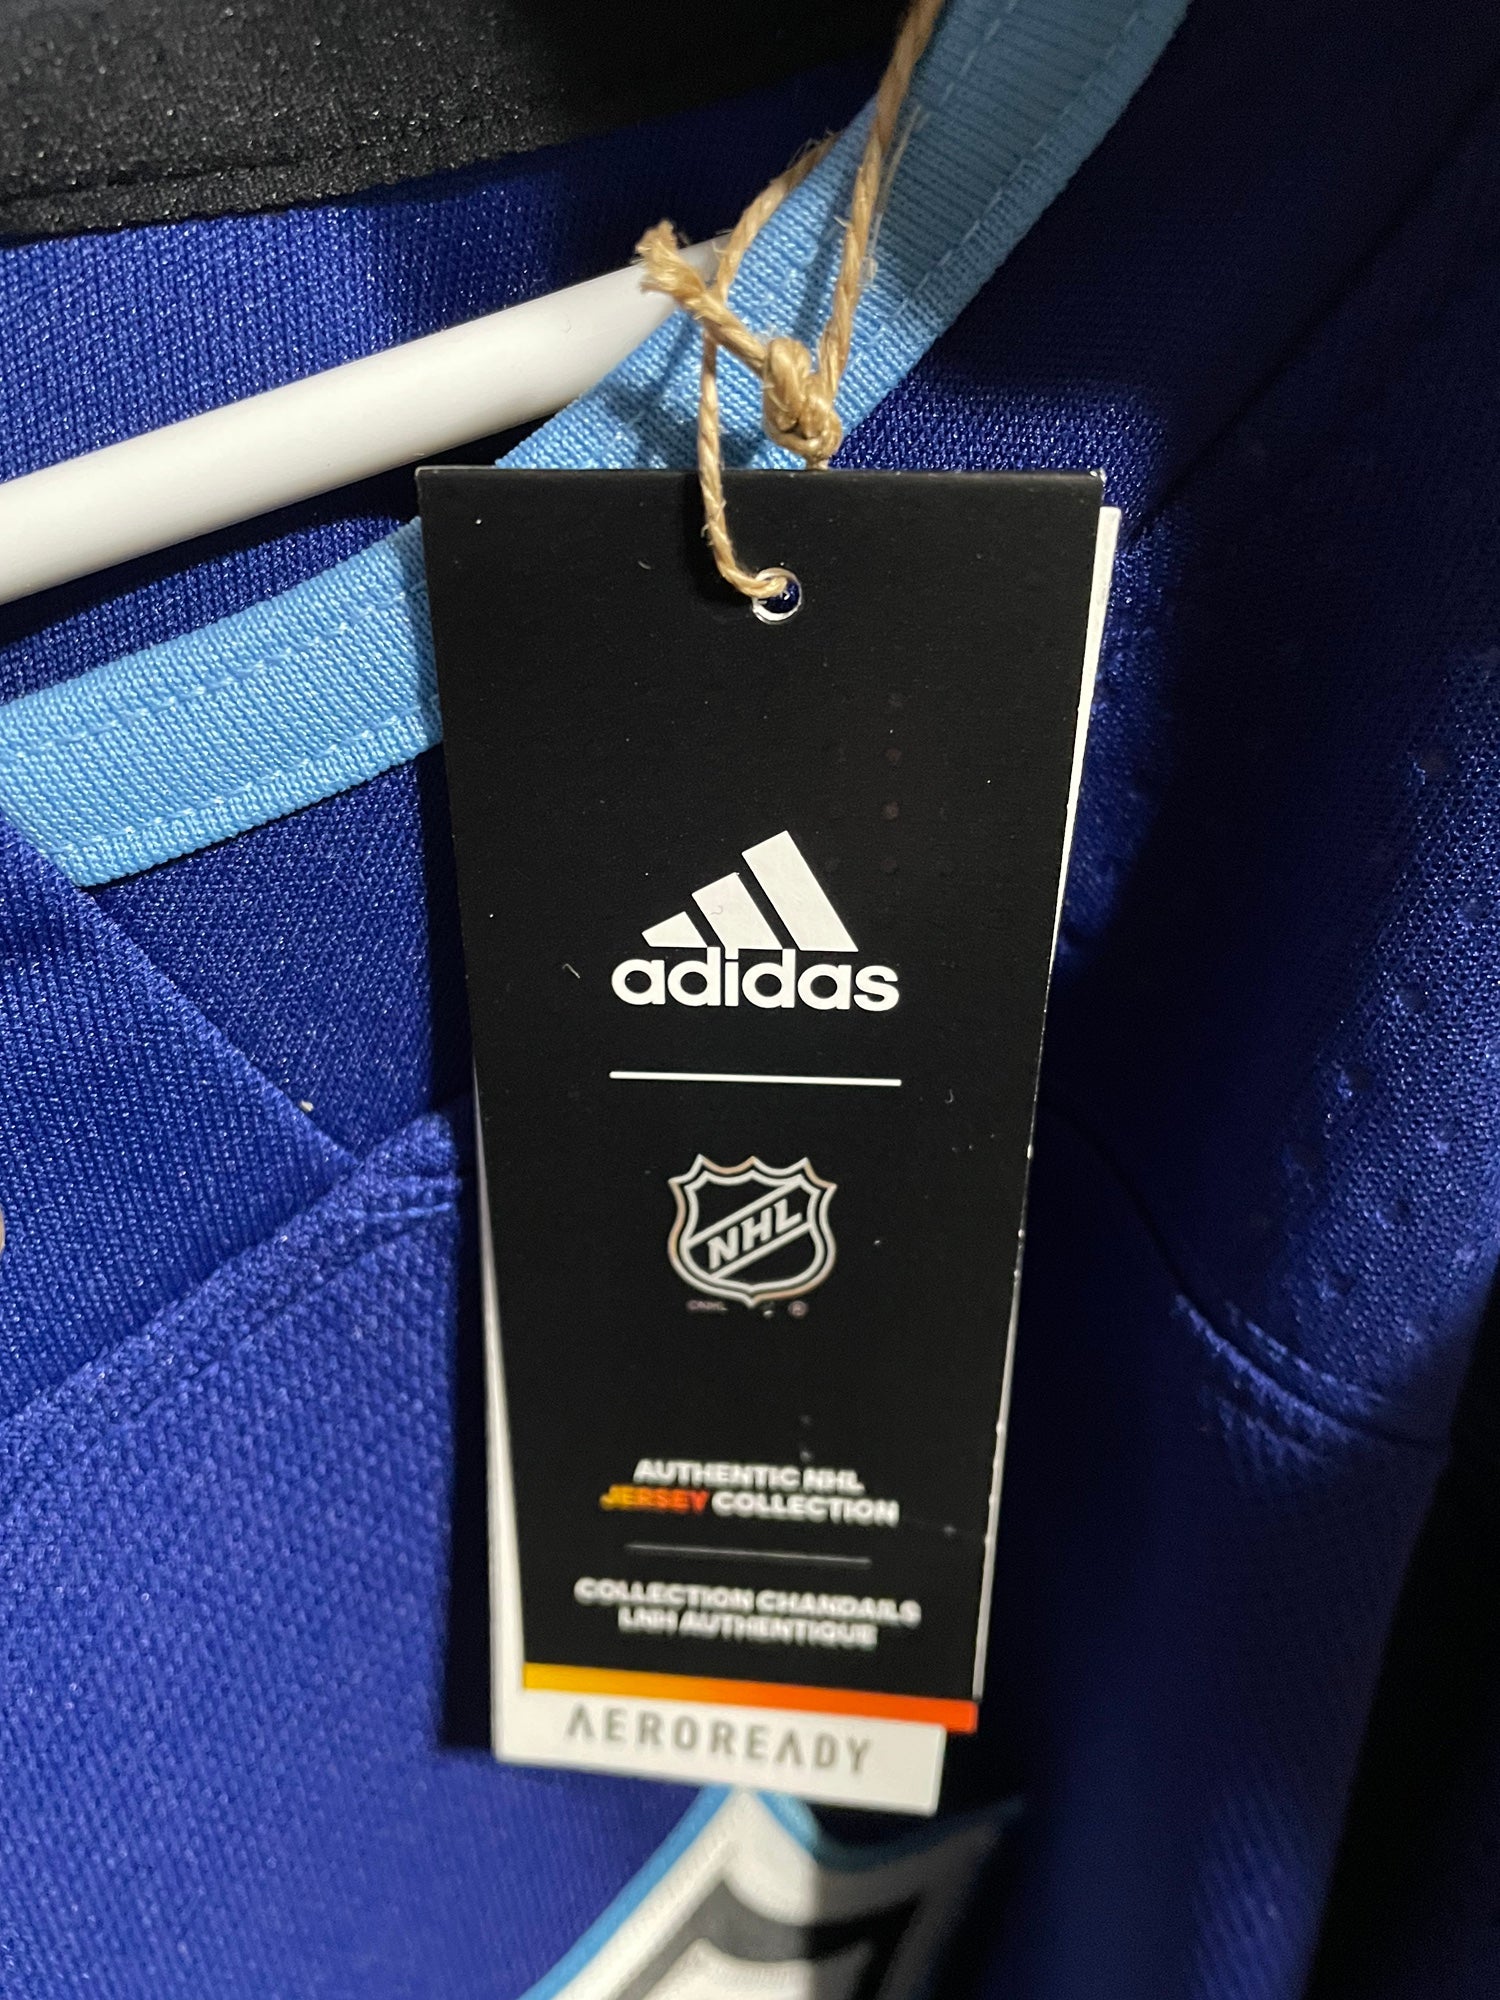 adidas & NHL launch upcycled 2019 All-Star Game Jerseys